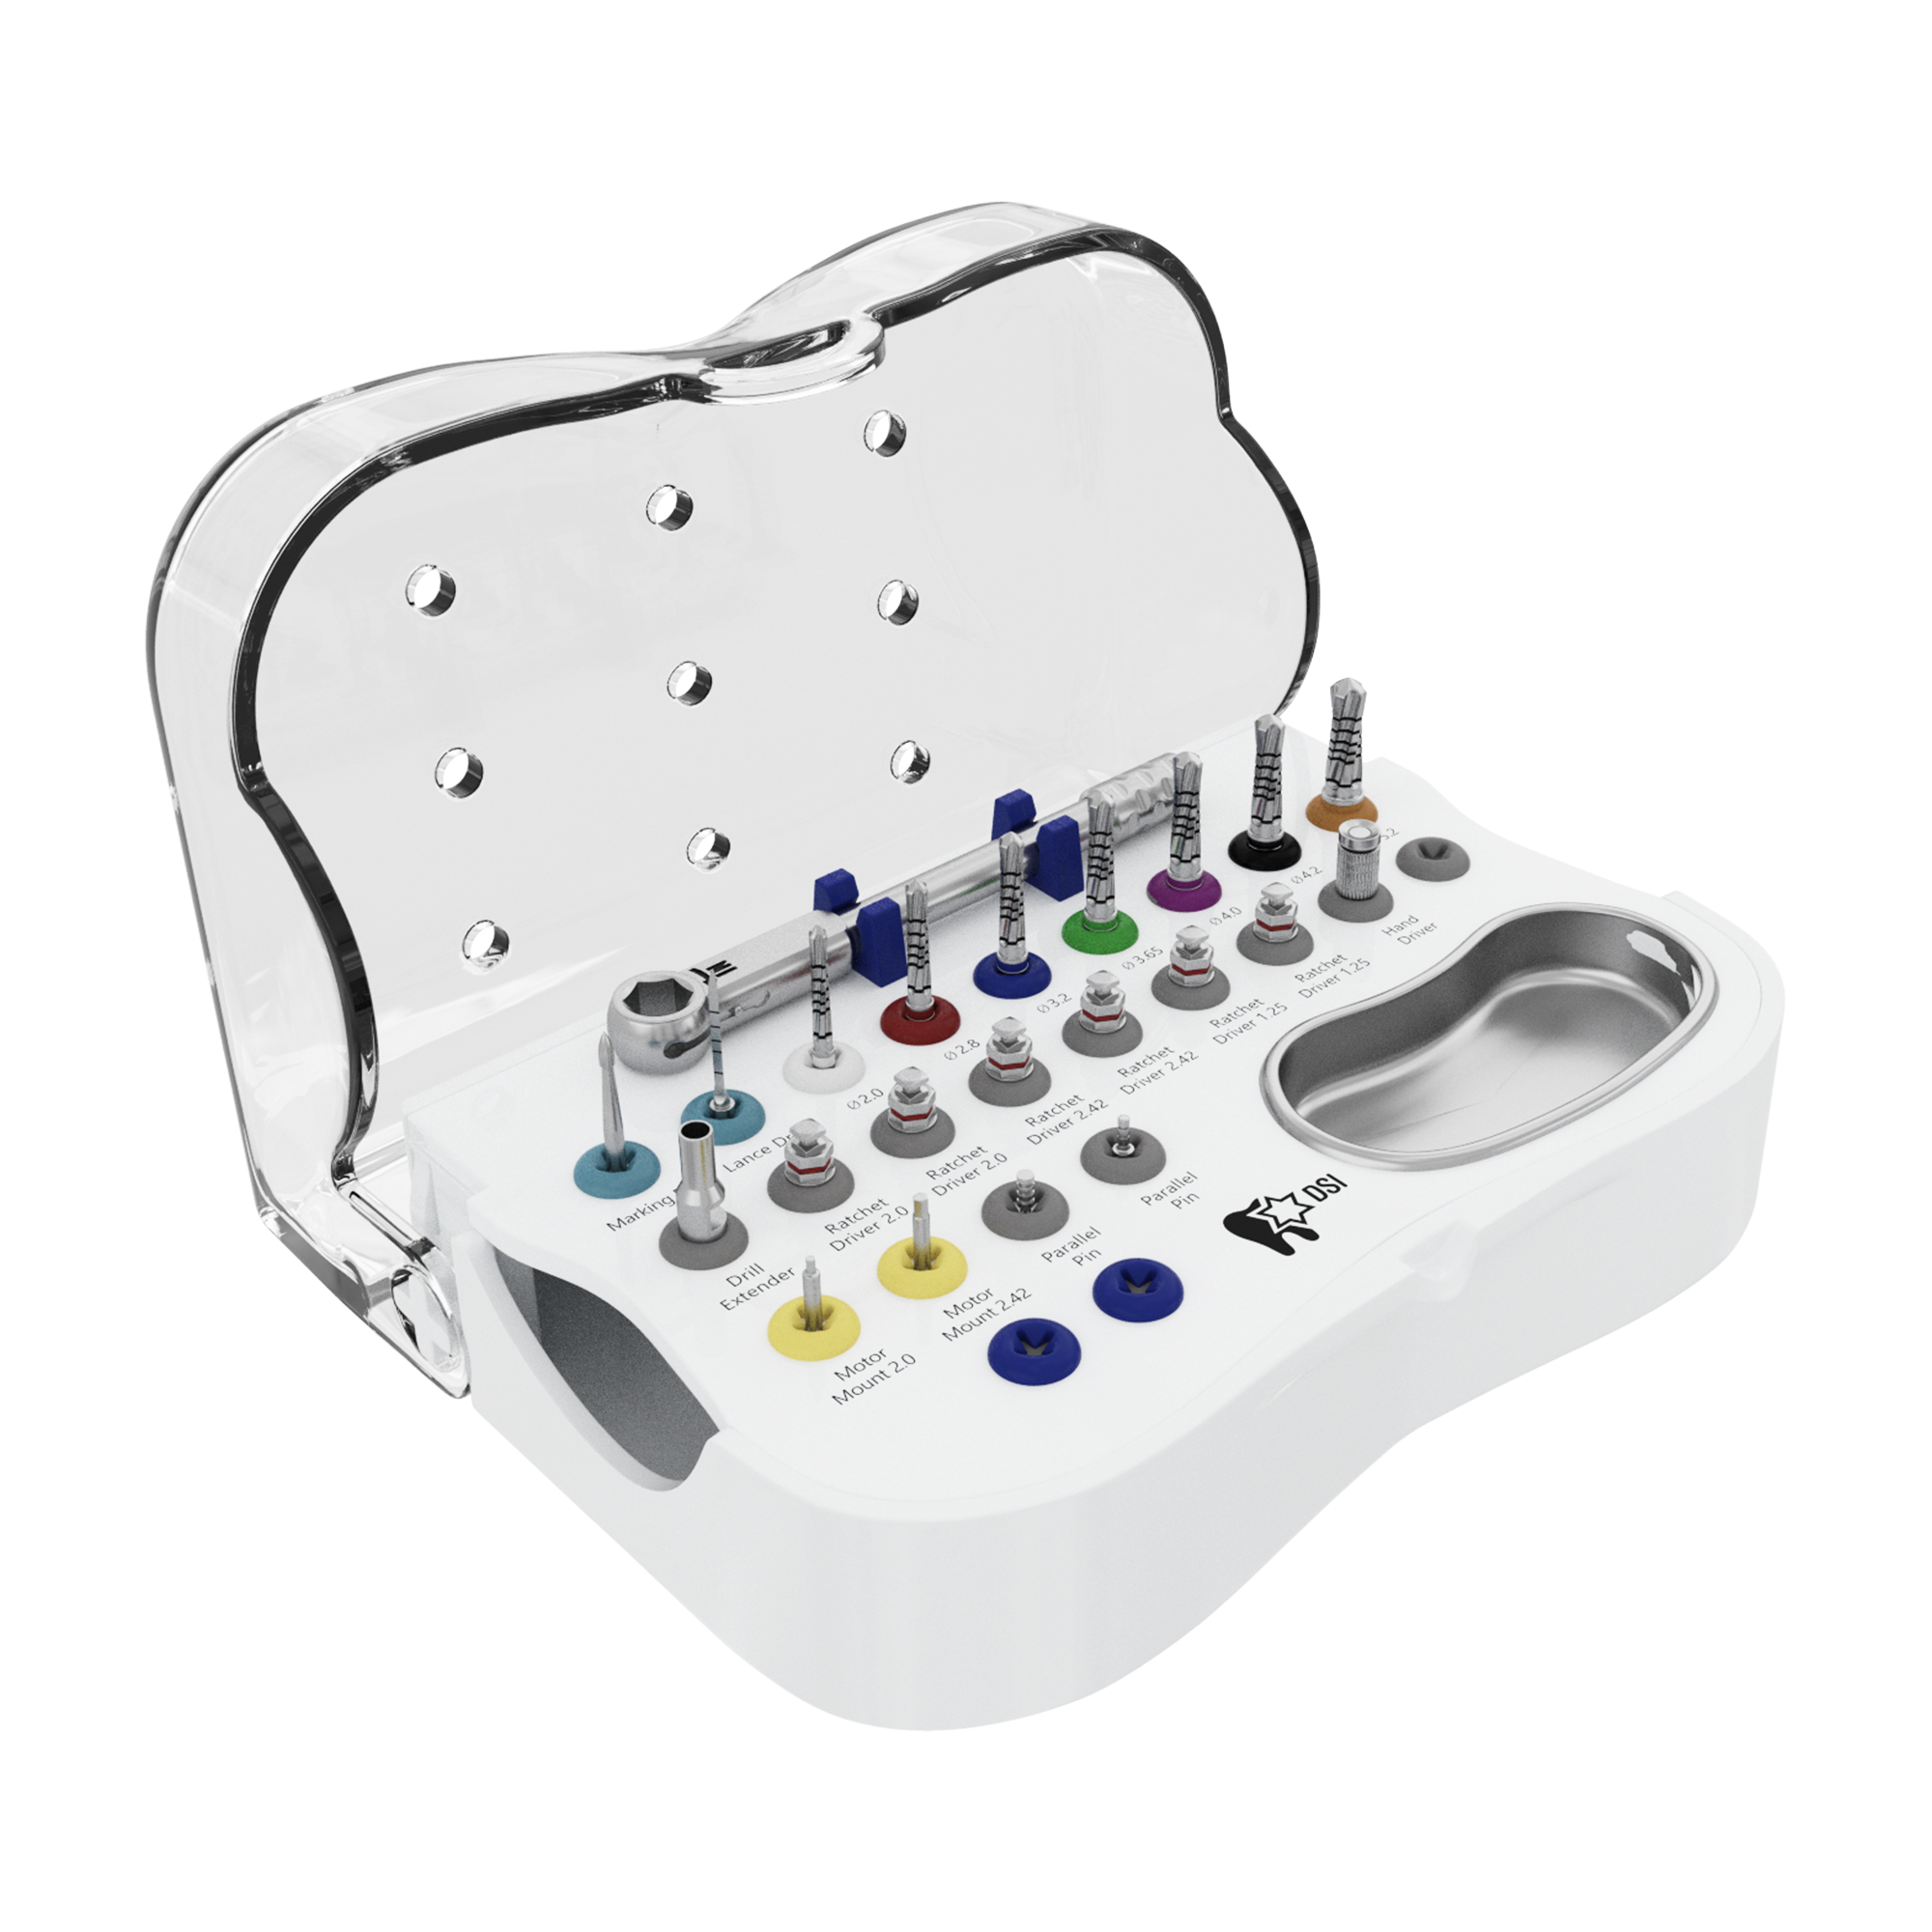 DSI SK002 Essential Surgical Kit For Implant Placement